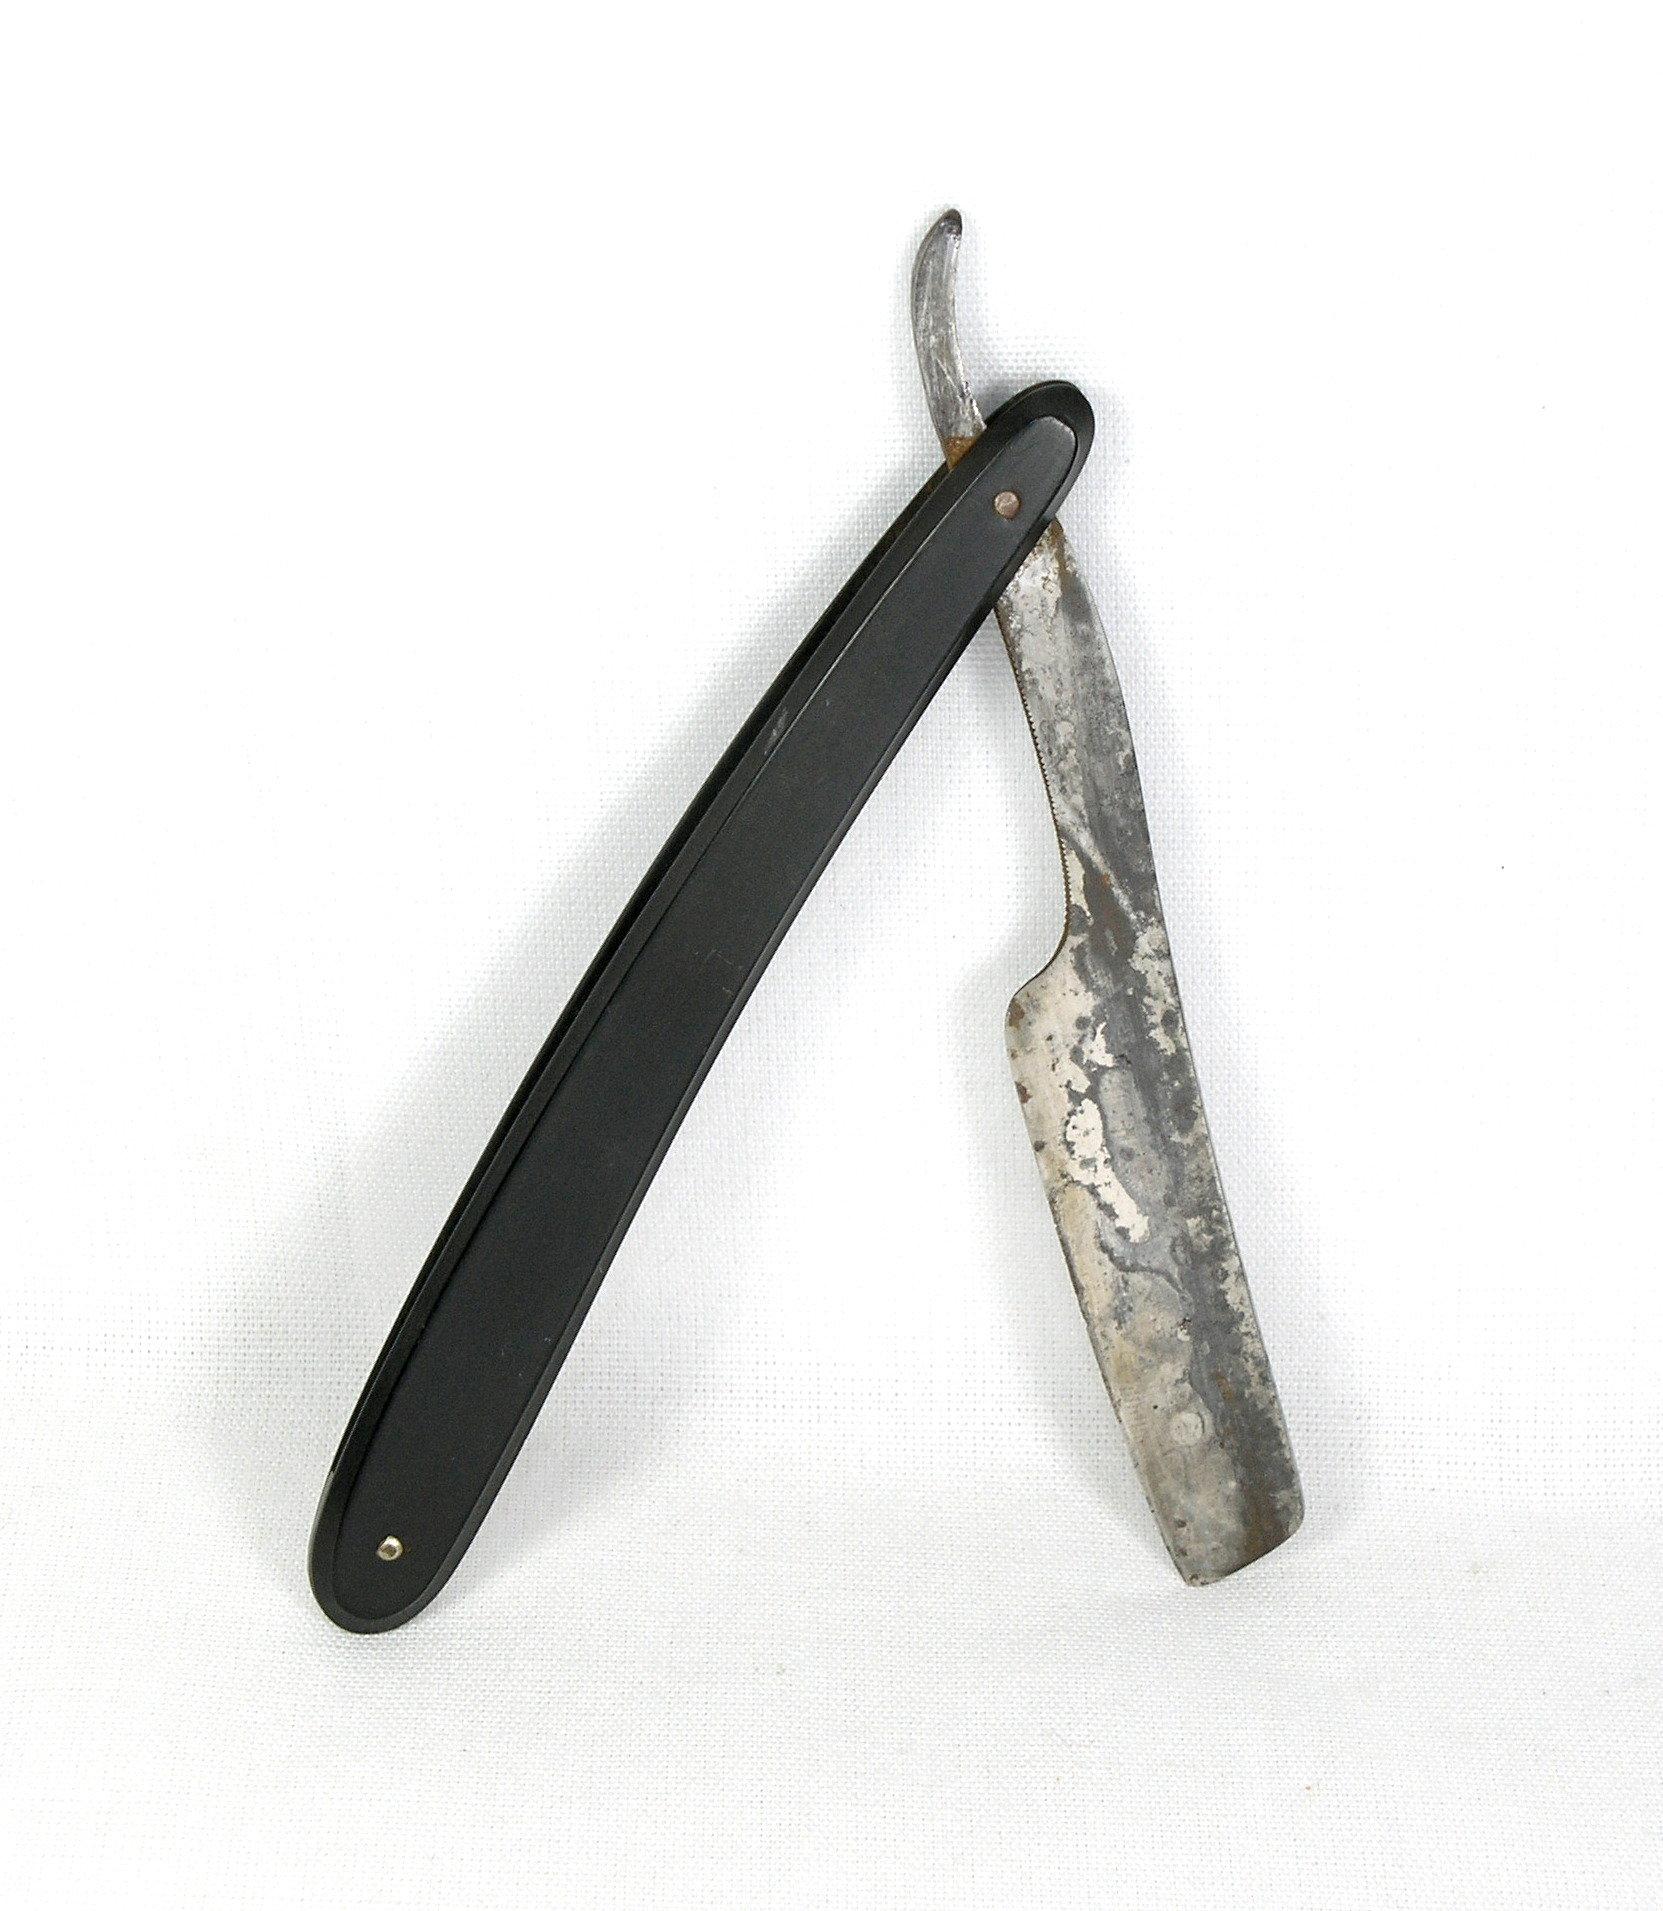 The MAB. Rd. straight razor. Small 5 1/4" overall length classifies as a "m